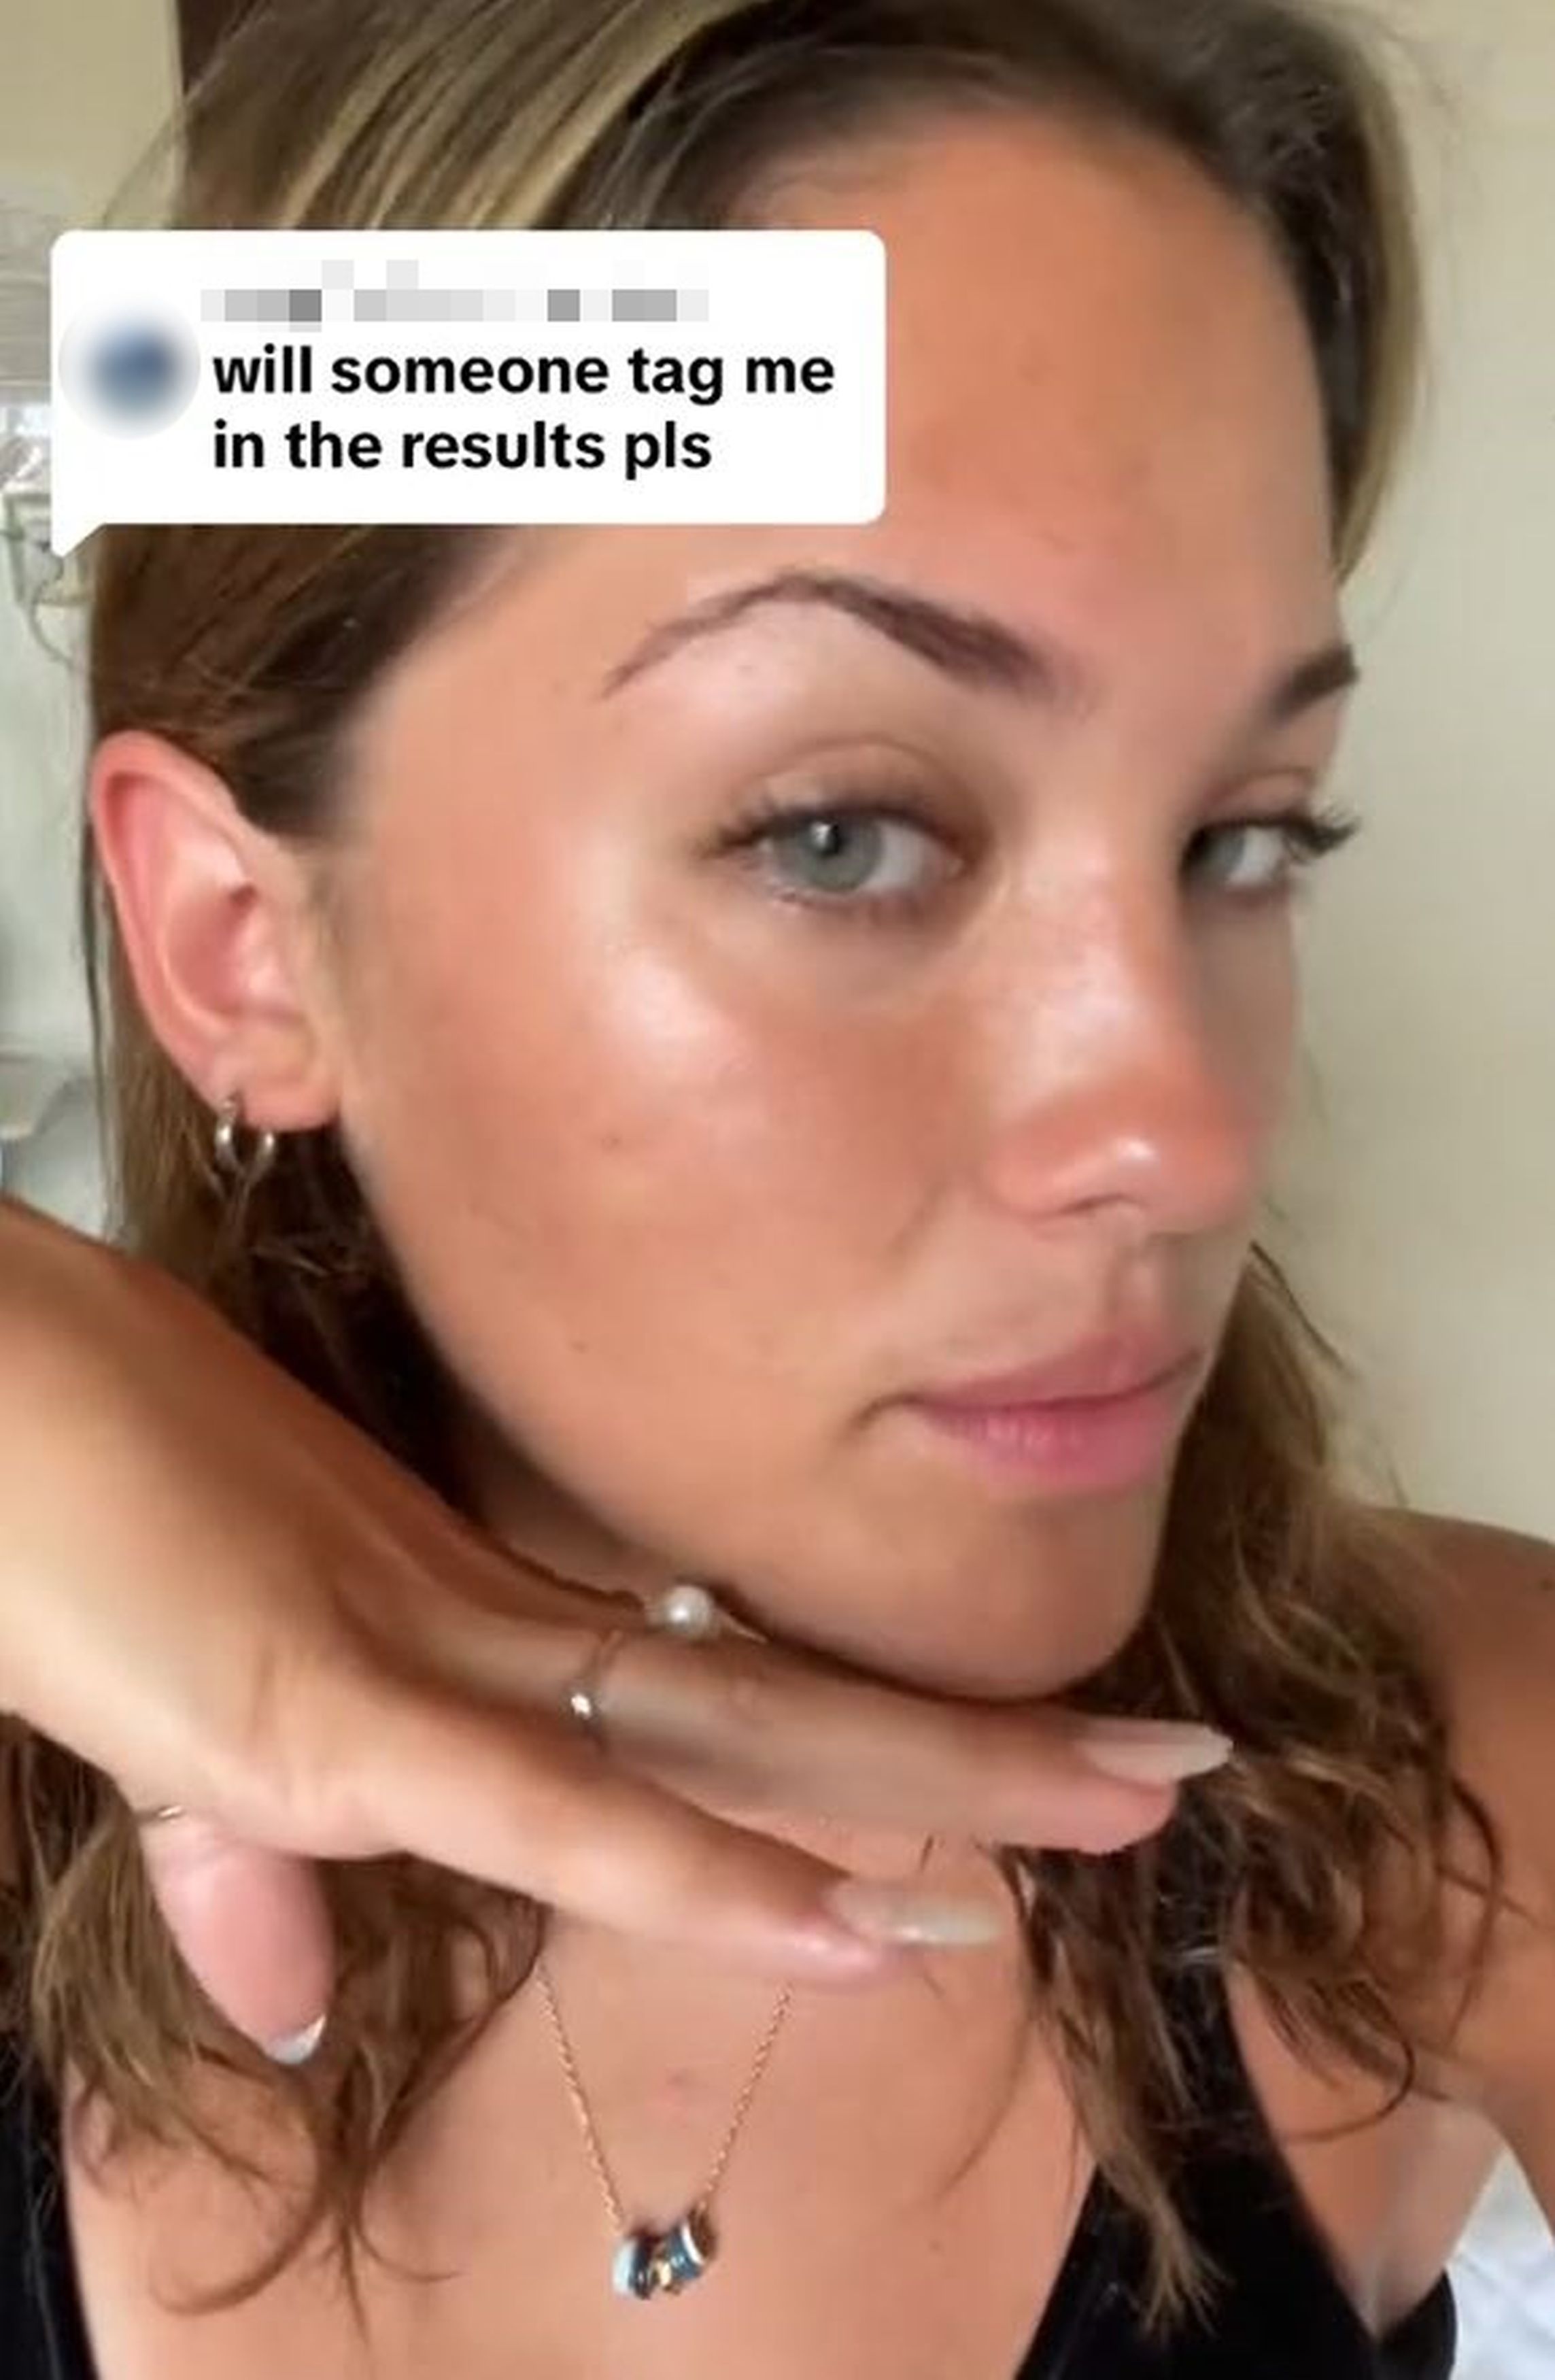 Critics warned she was 'risking skin cancer' by deliberately using lower levels of sunscreen, but that didn't stop her from showing off her glow